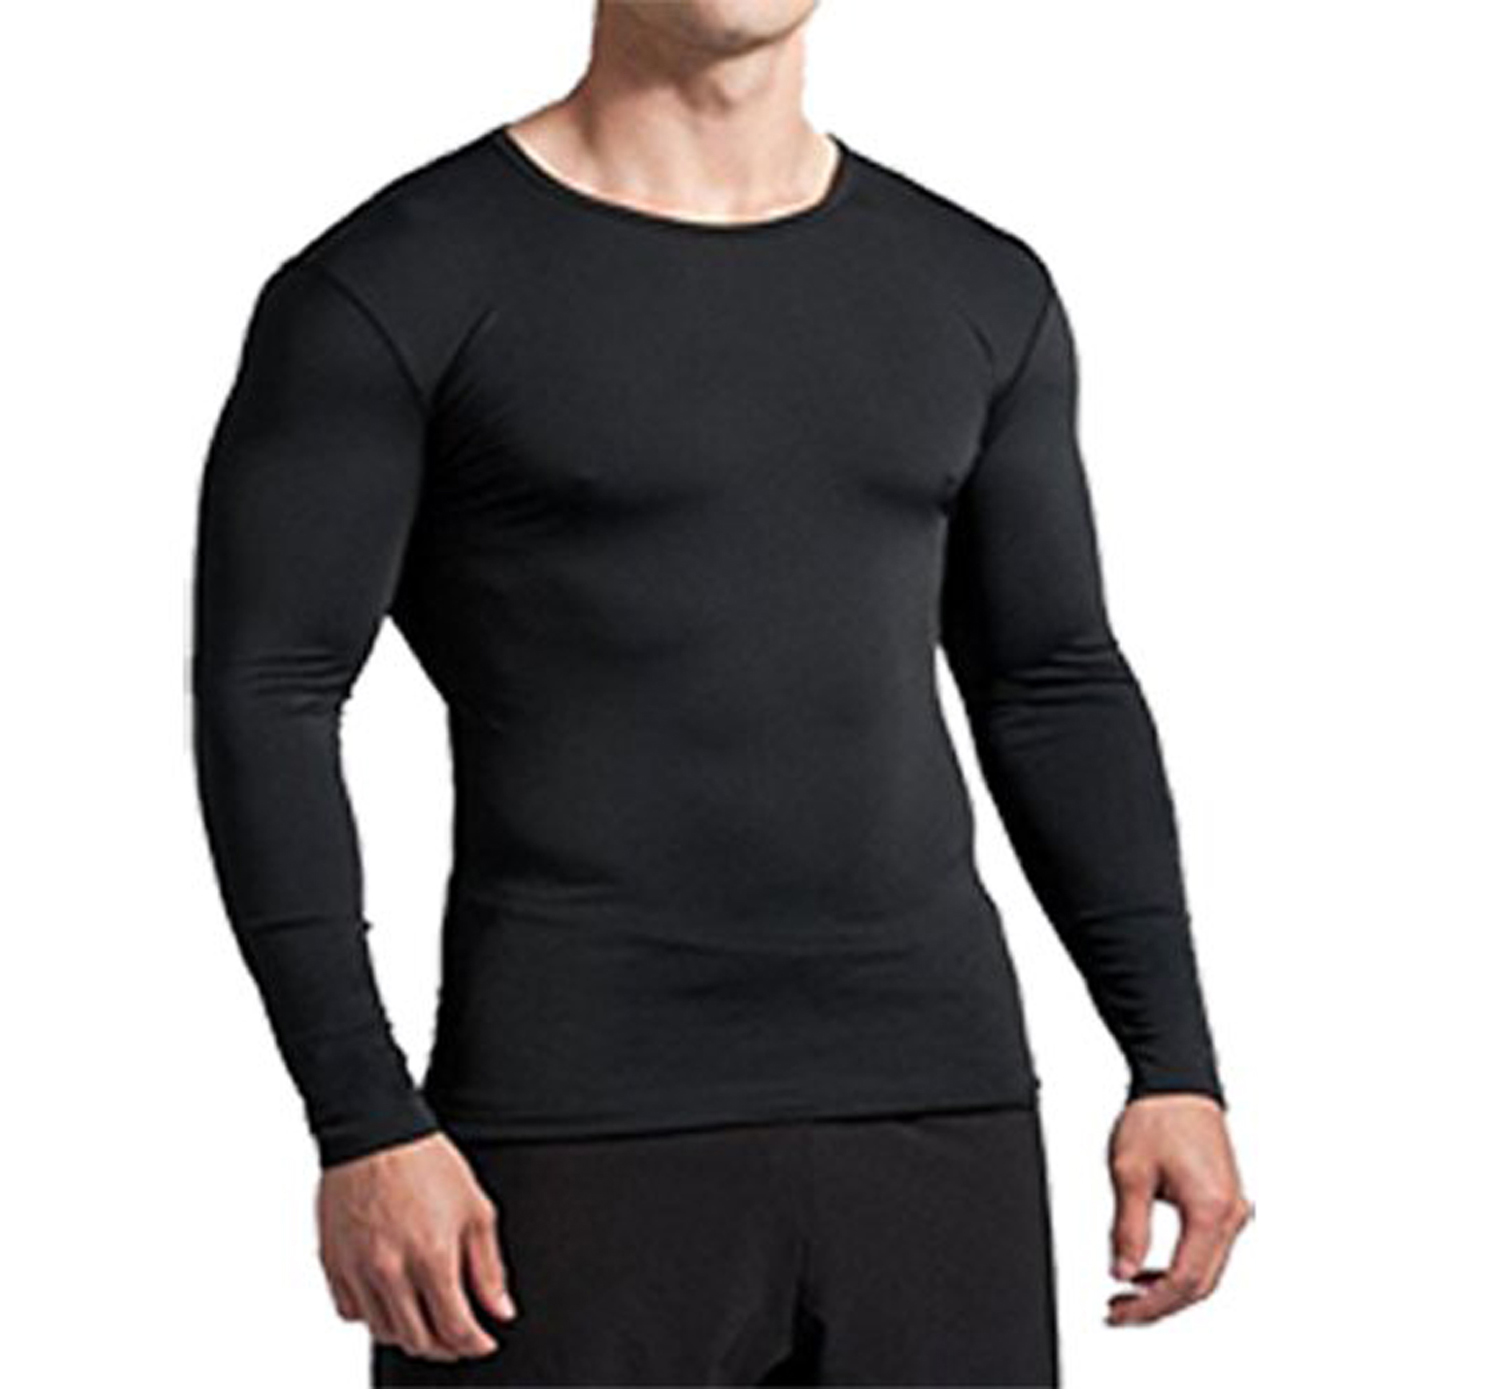 Buy Bloomun Full Sleeve Black Compression / Inner Tight Tops Online ...